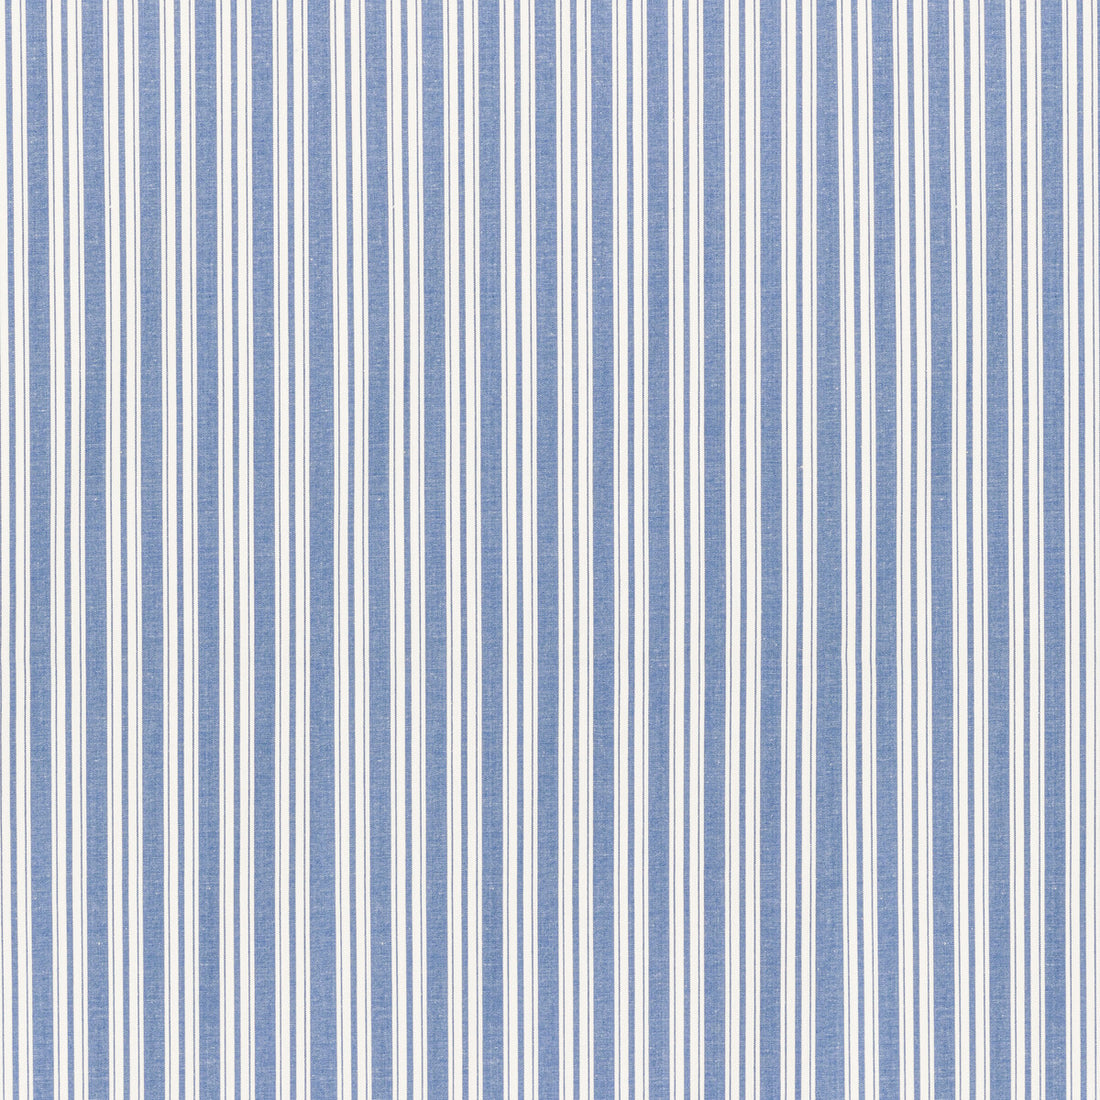 Selune Stripe fabric in sky color - pattern 8022118.115.0 - by Brunschwig &amp; Fils in the Normant Checks And Stripes II collection